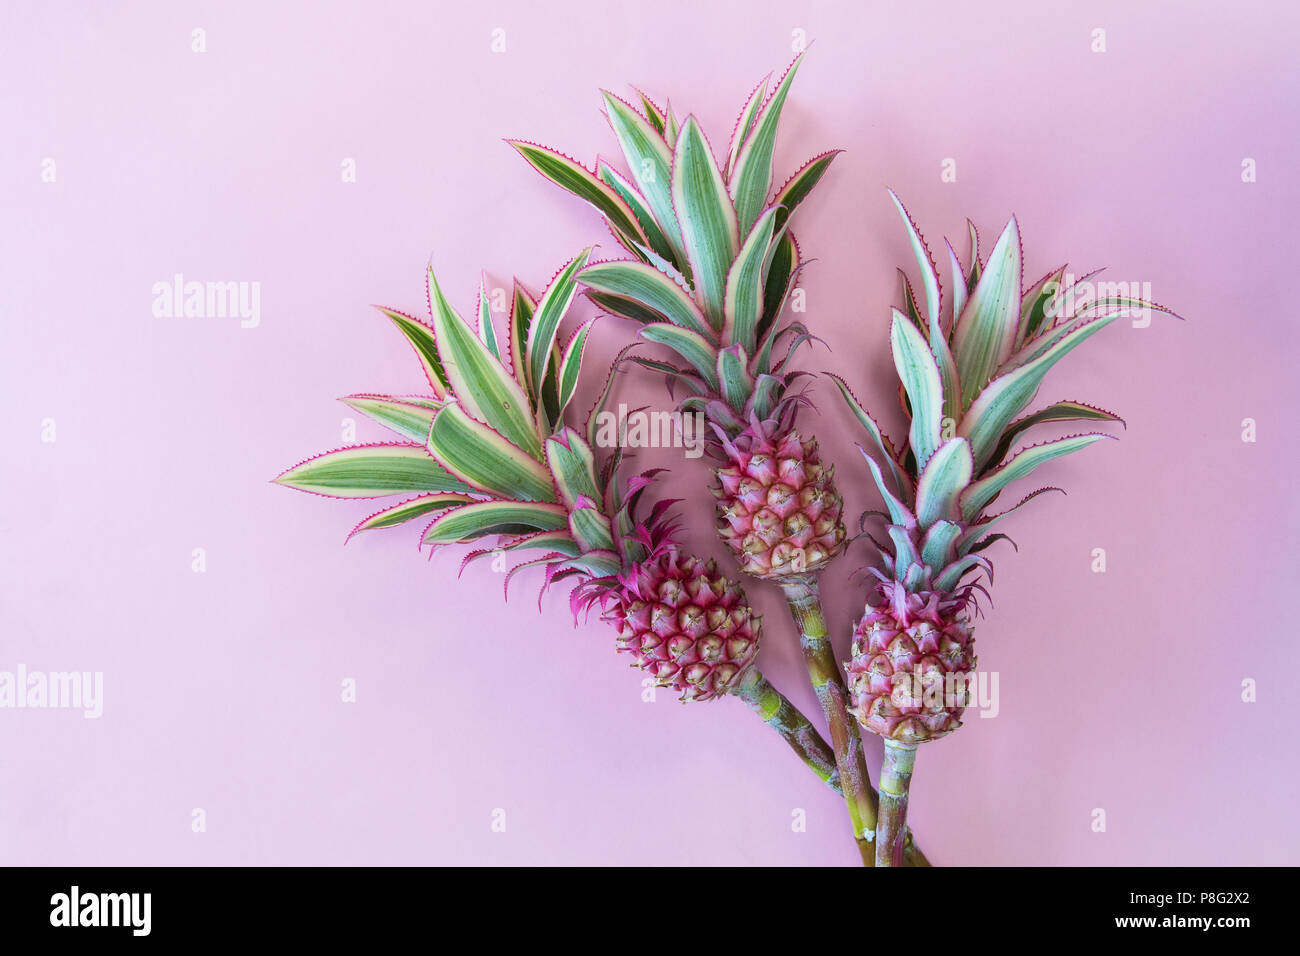 Pineappless flowers on pinlk paper background Stock Photo